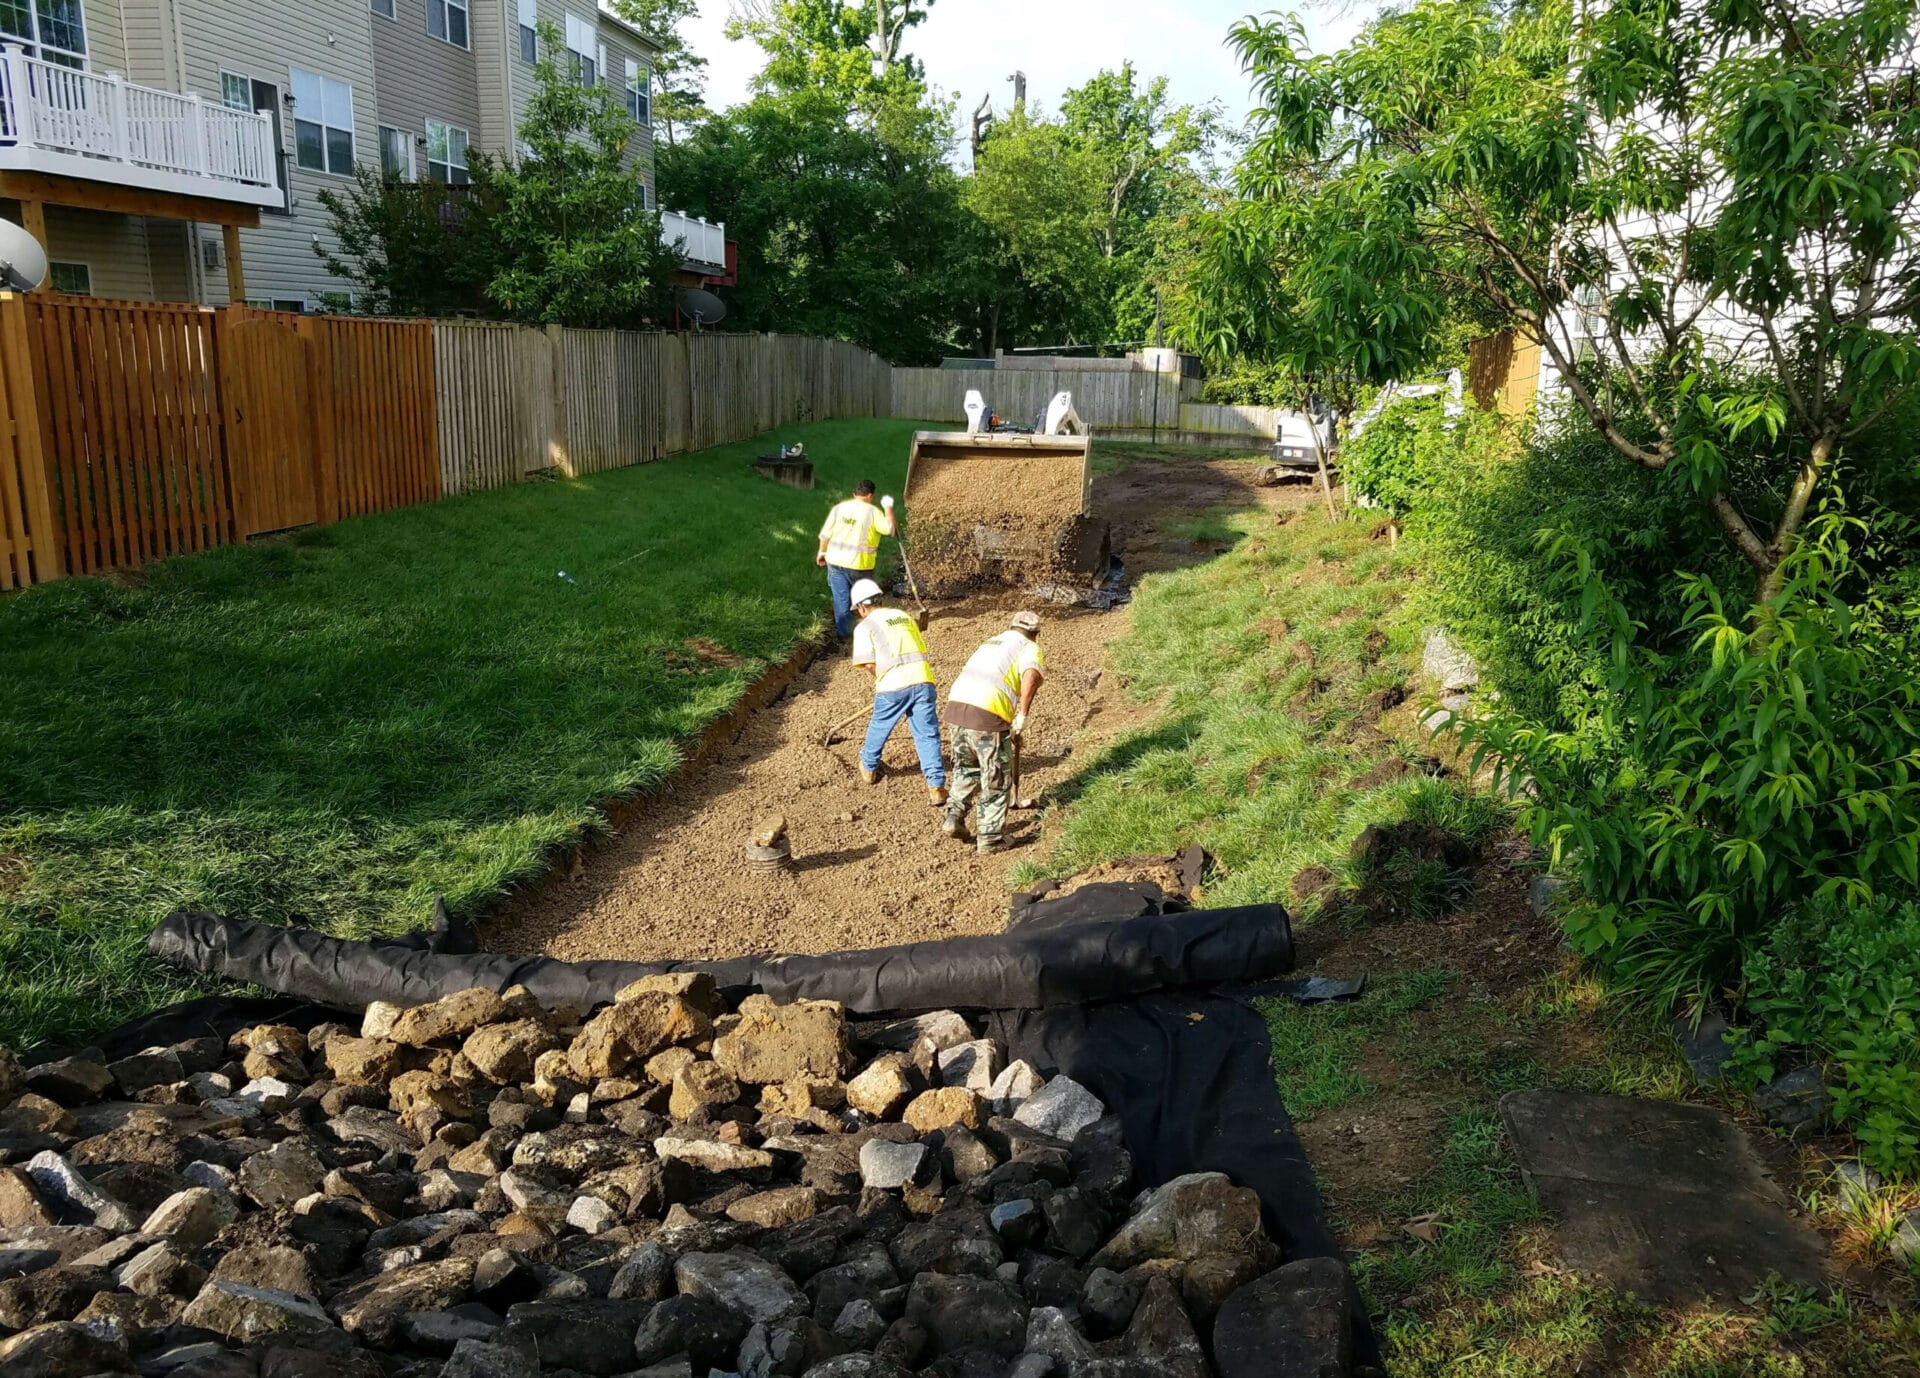 Muller crew members working to dig up dirt and lay down fabric with stones on it in the alley of a suburban neighborhood.